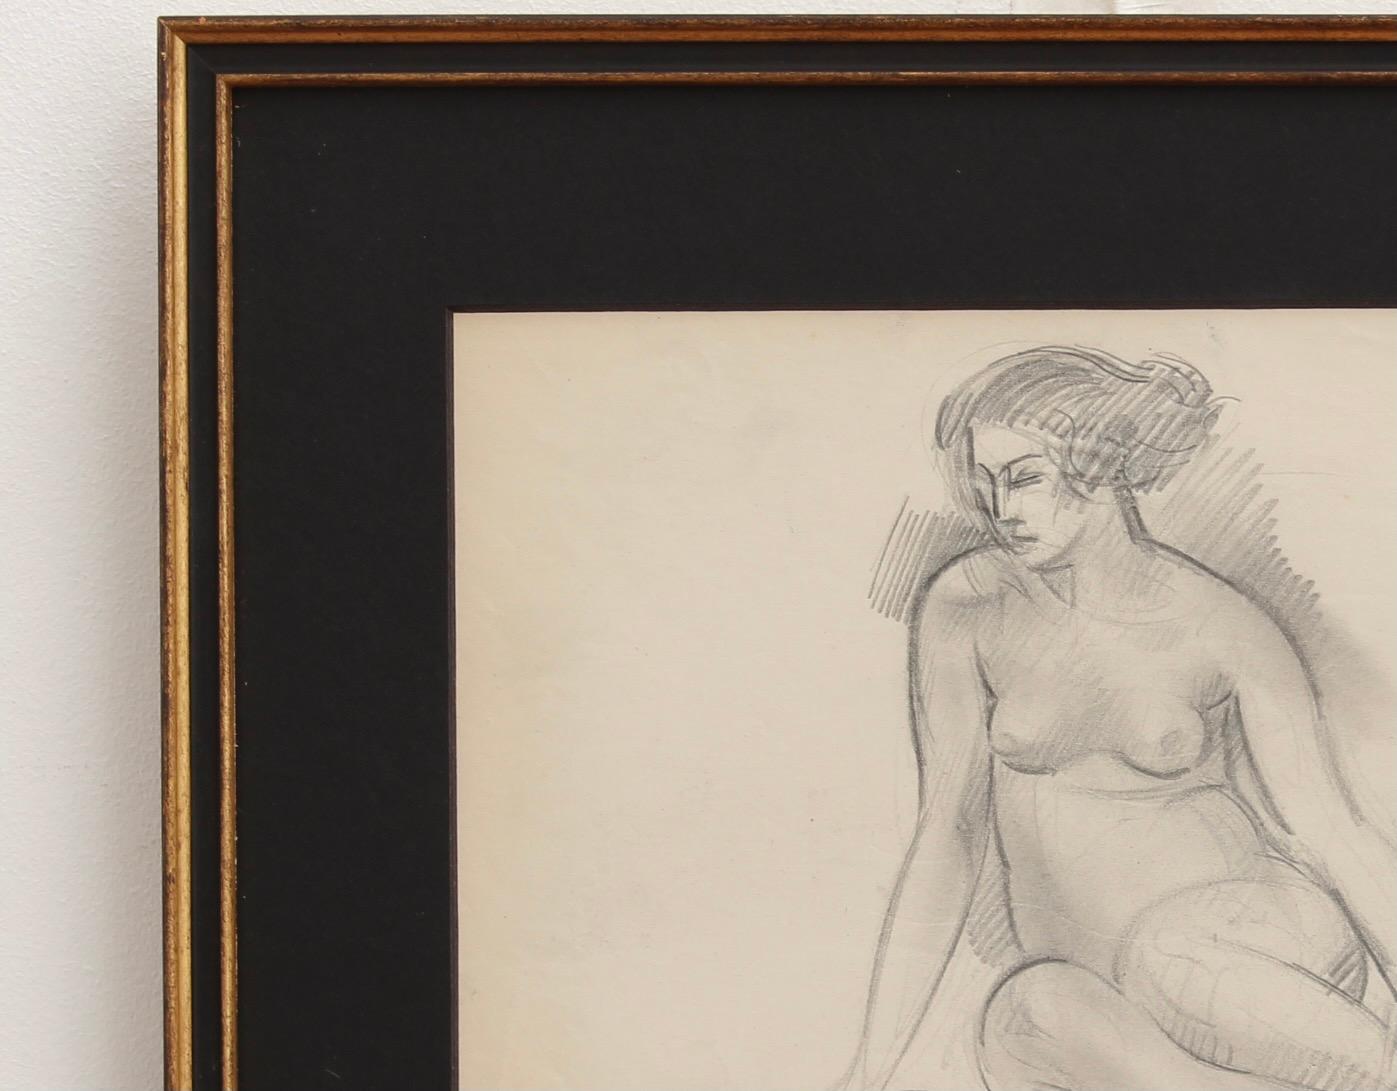 'Portrait of Seated Nude', pencil on art paper, by French artist, Guillaume Dulac (circa 1920s). An artist known for his exquisite drawings - many are sketches for his larger oil paintings or other works - this piece is compelling because its image